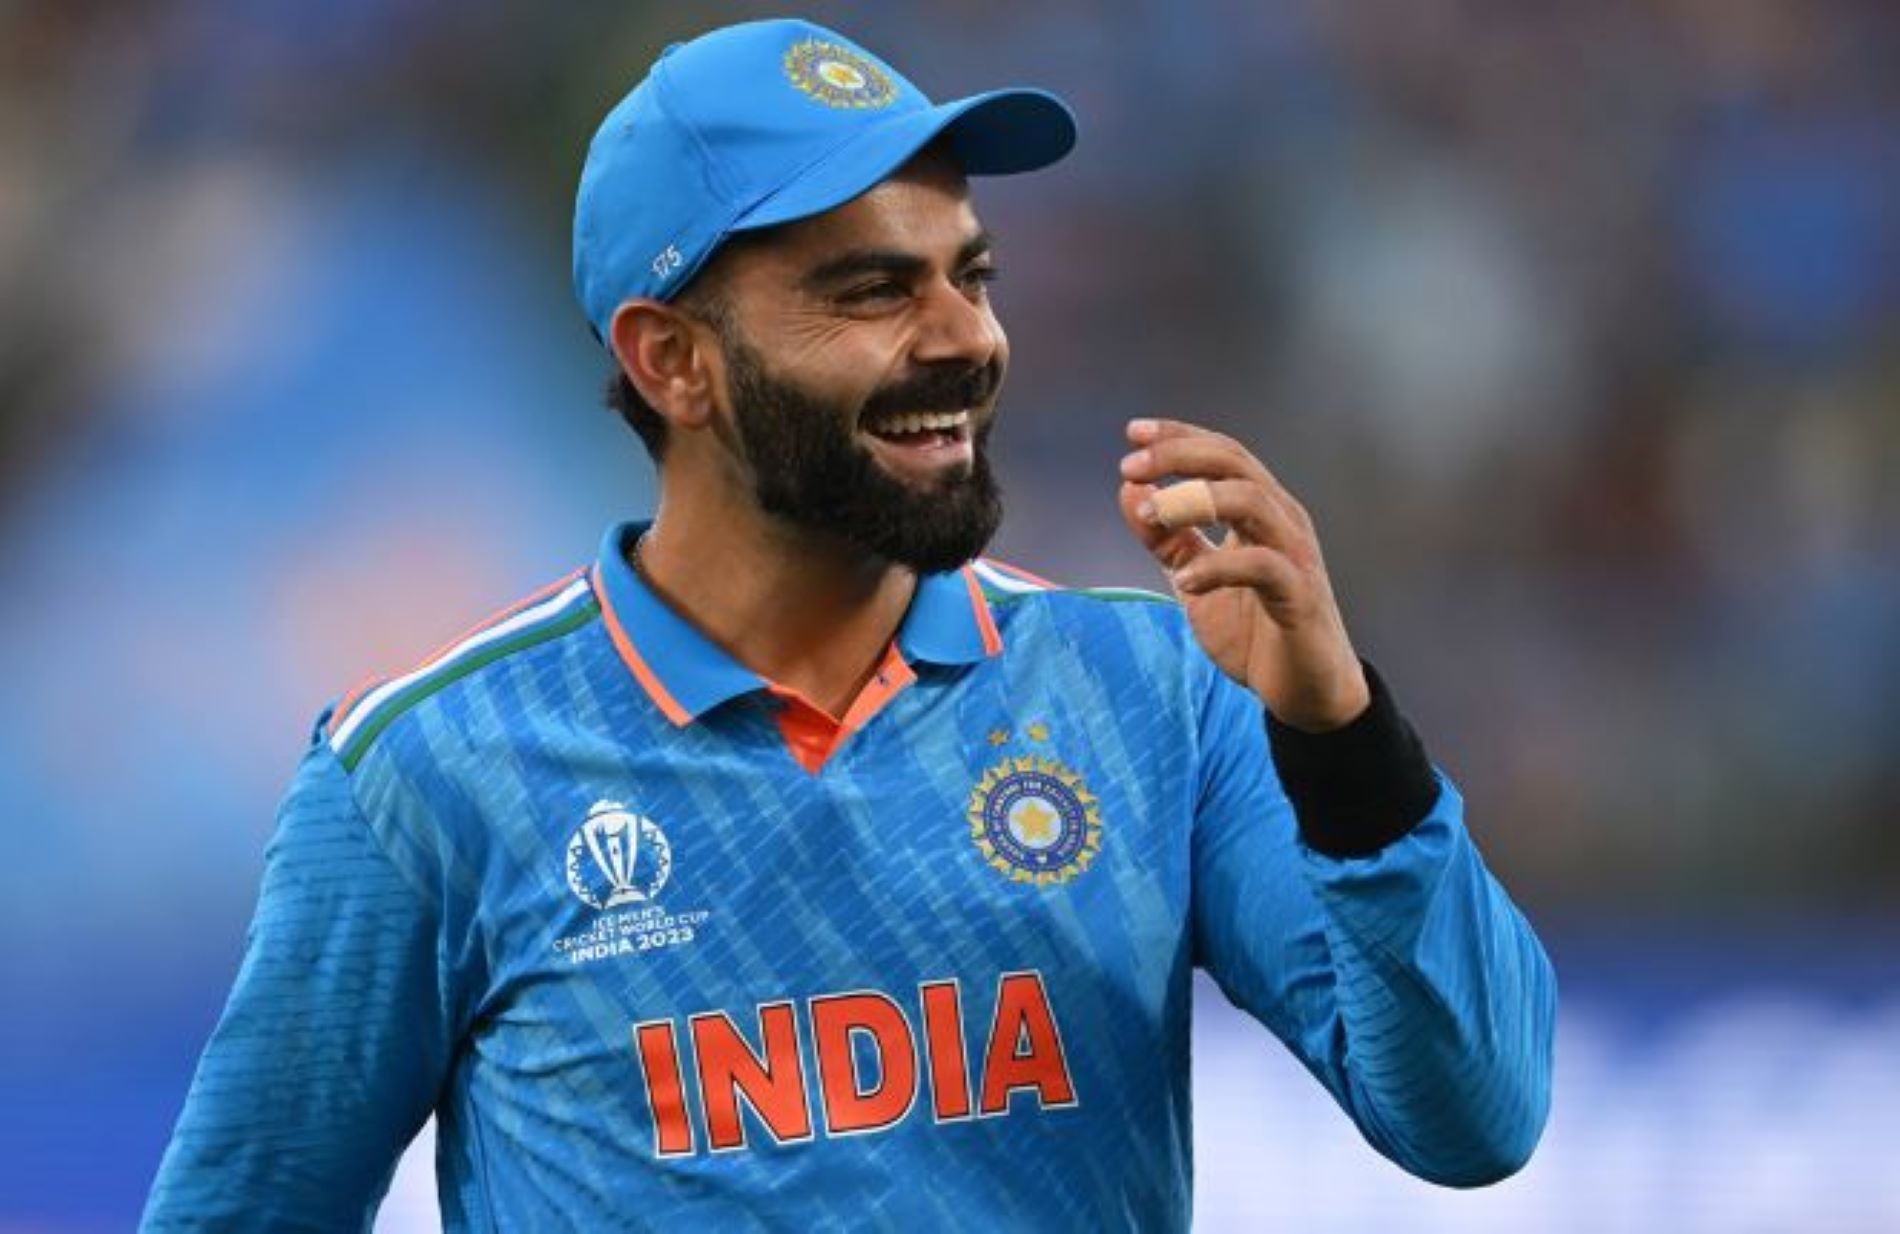 Kohli has been sparkling form in the ongoing World Cup